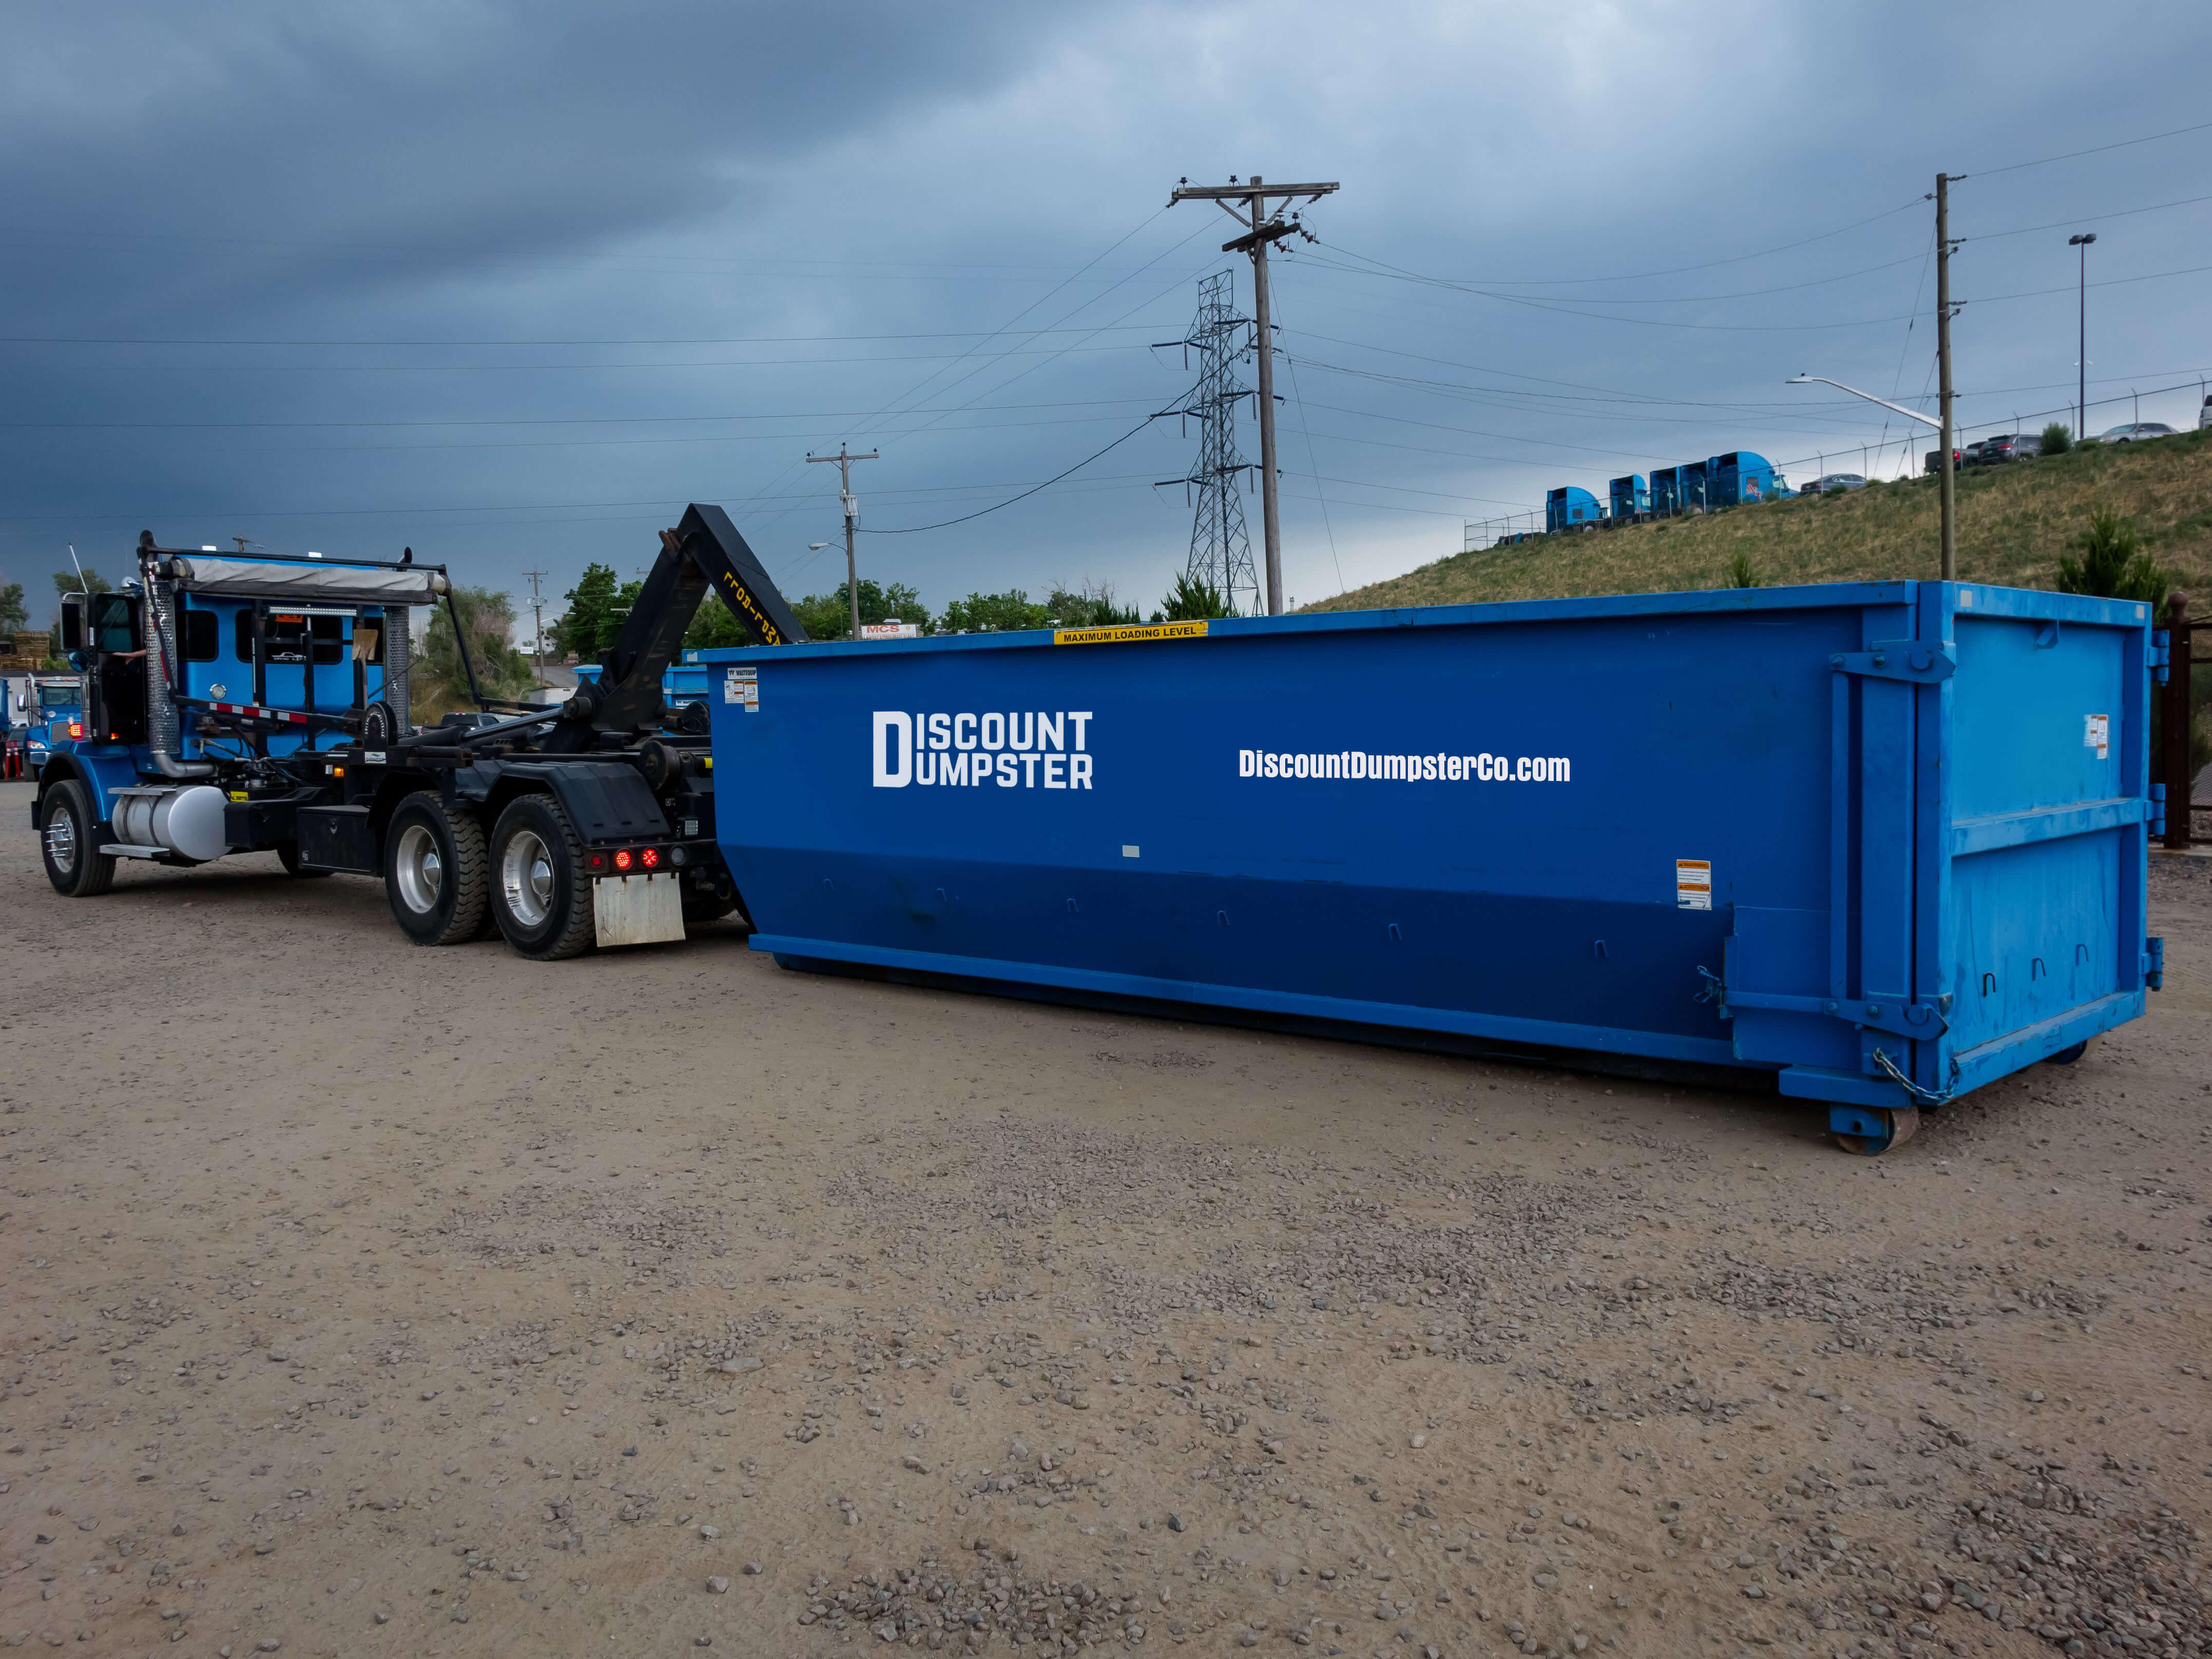 Discount dumpster has roll off dumpsters and waste removal services in Denver co